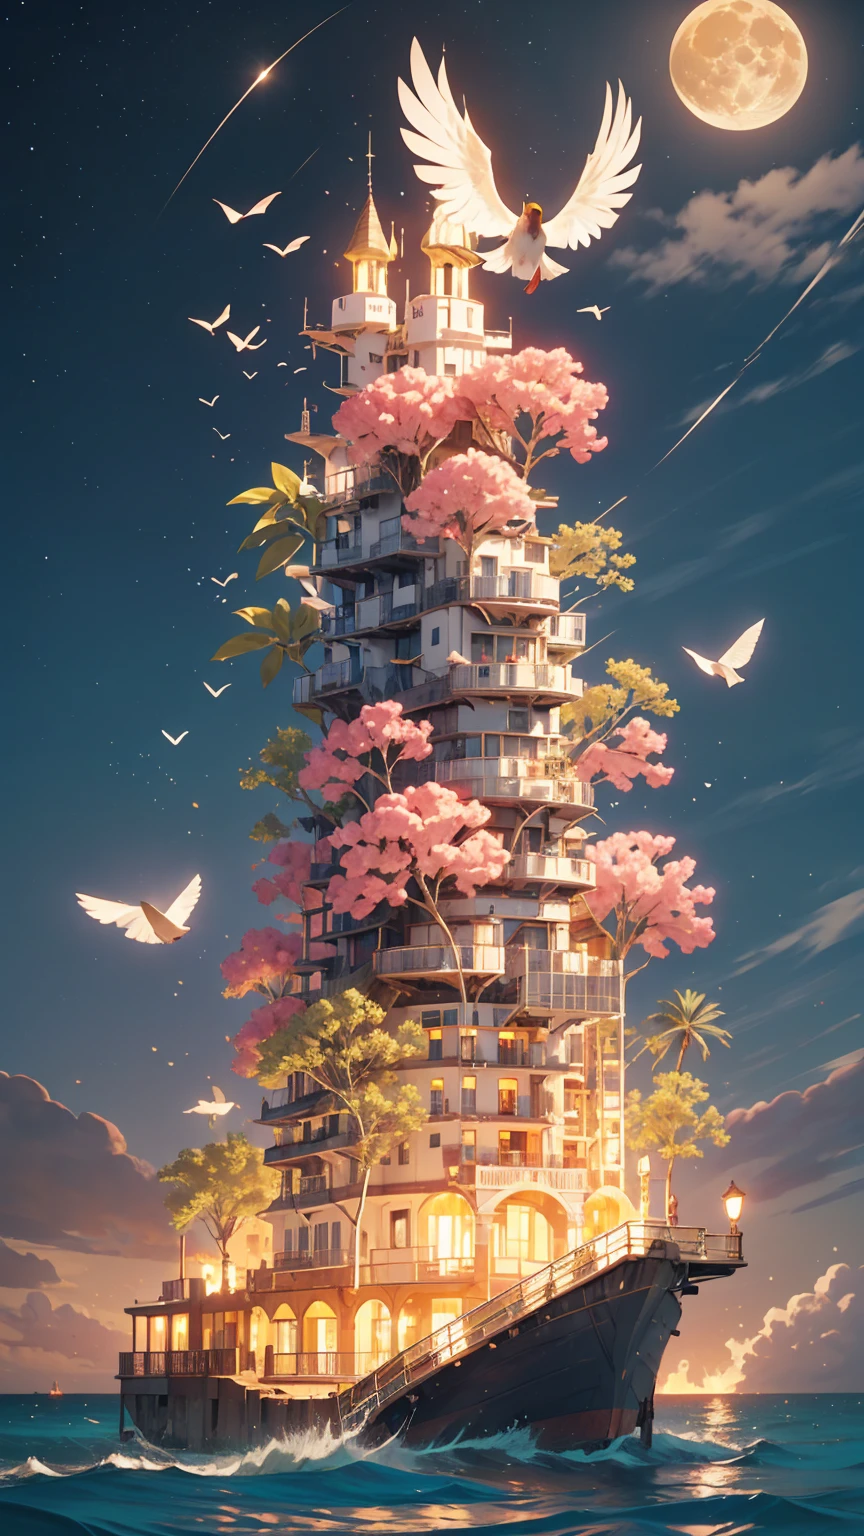 city, Flowers, A delicate scene, null, White cloud, The sun shines on the white beach. bird, pink Flowers and bright big shells, Diamond Crystal, At the Beach, Fantasy, night null, moon, cigarette, fire, photograph, High resolution, 8k, UHigh resolution, Super detailed, high quality, 1080p  